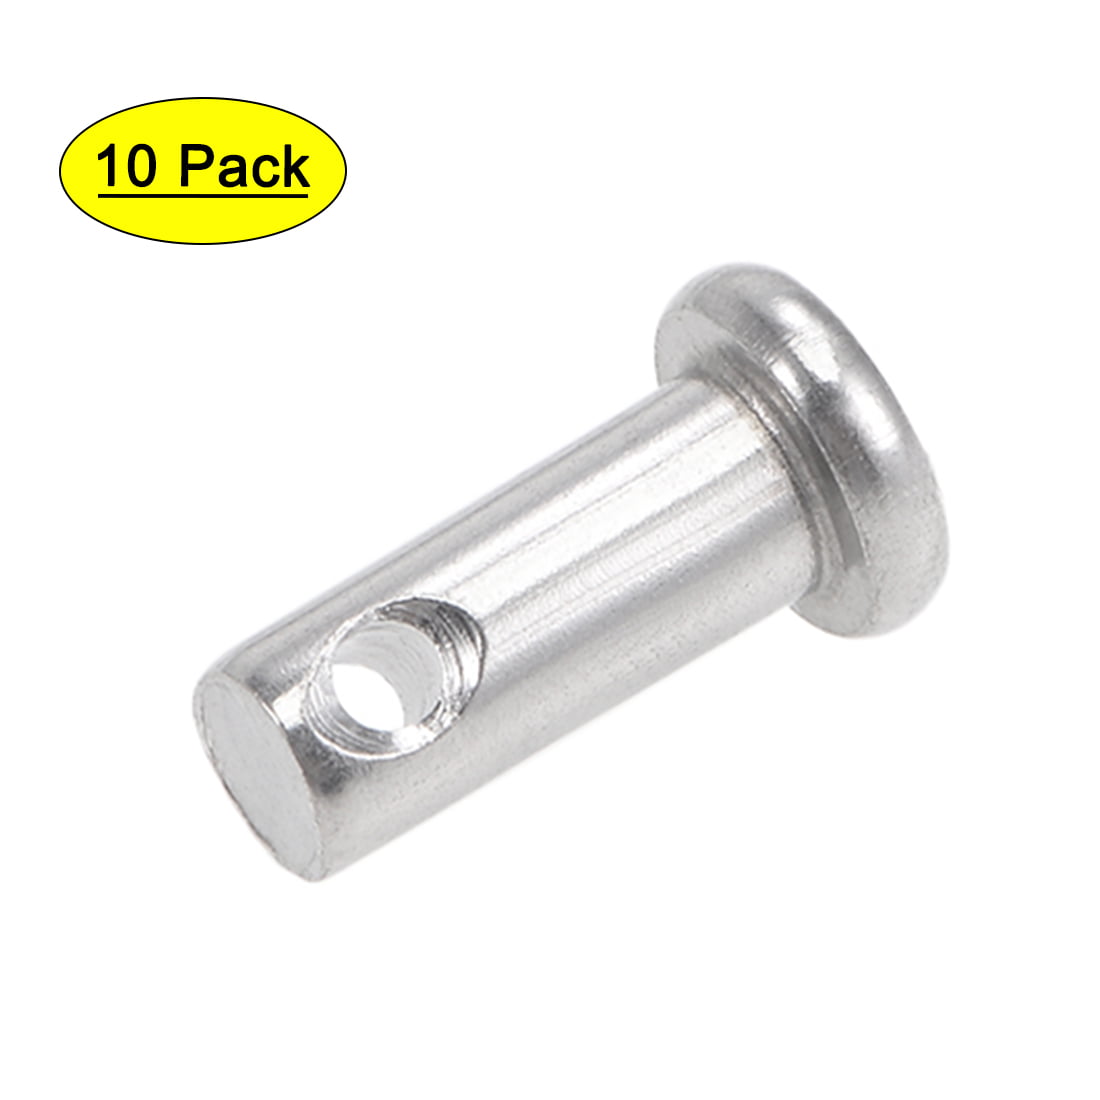 Single Hole Clevis Pins 5mm x 12mm Flat Head 304 Stainless Steel Pin 10Pcs 